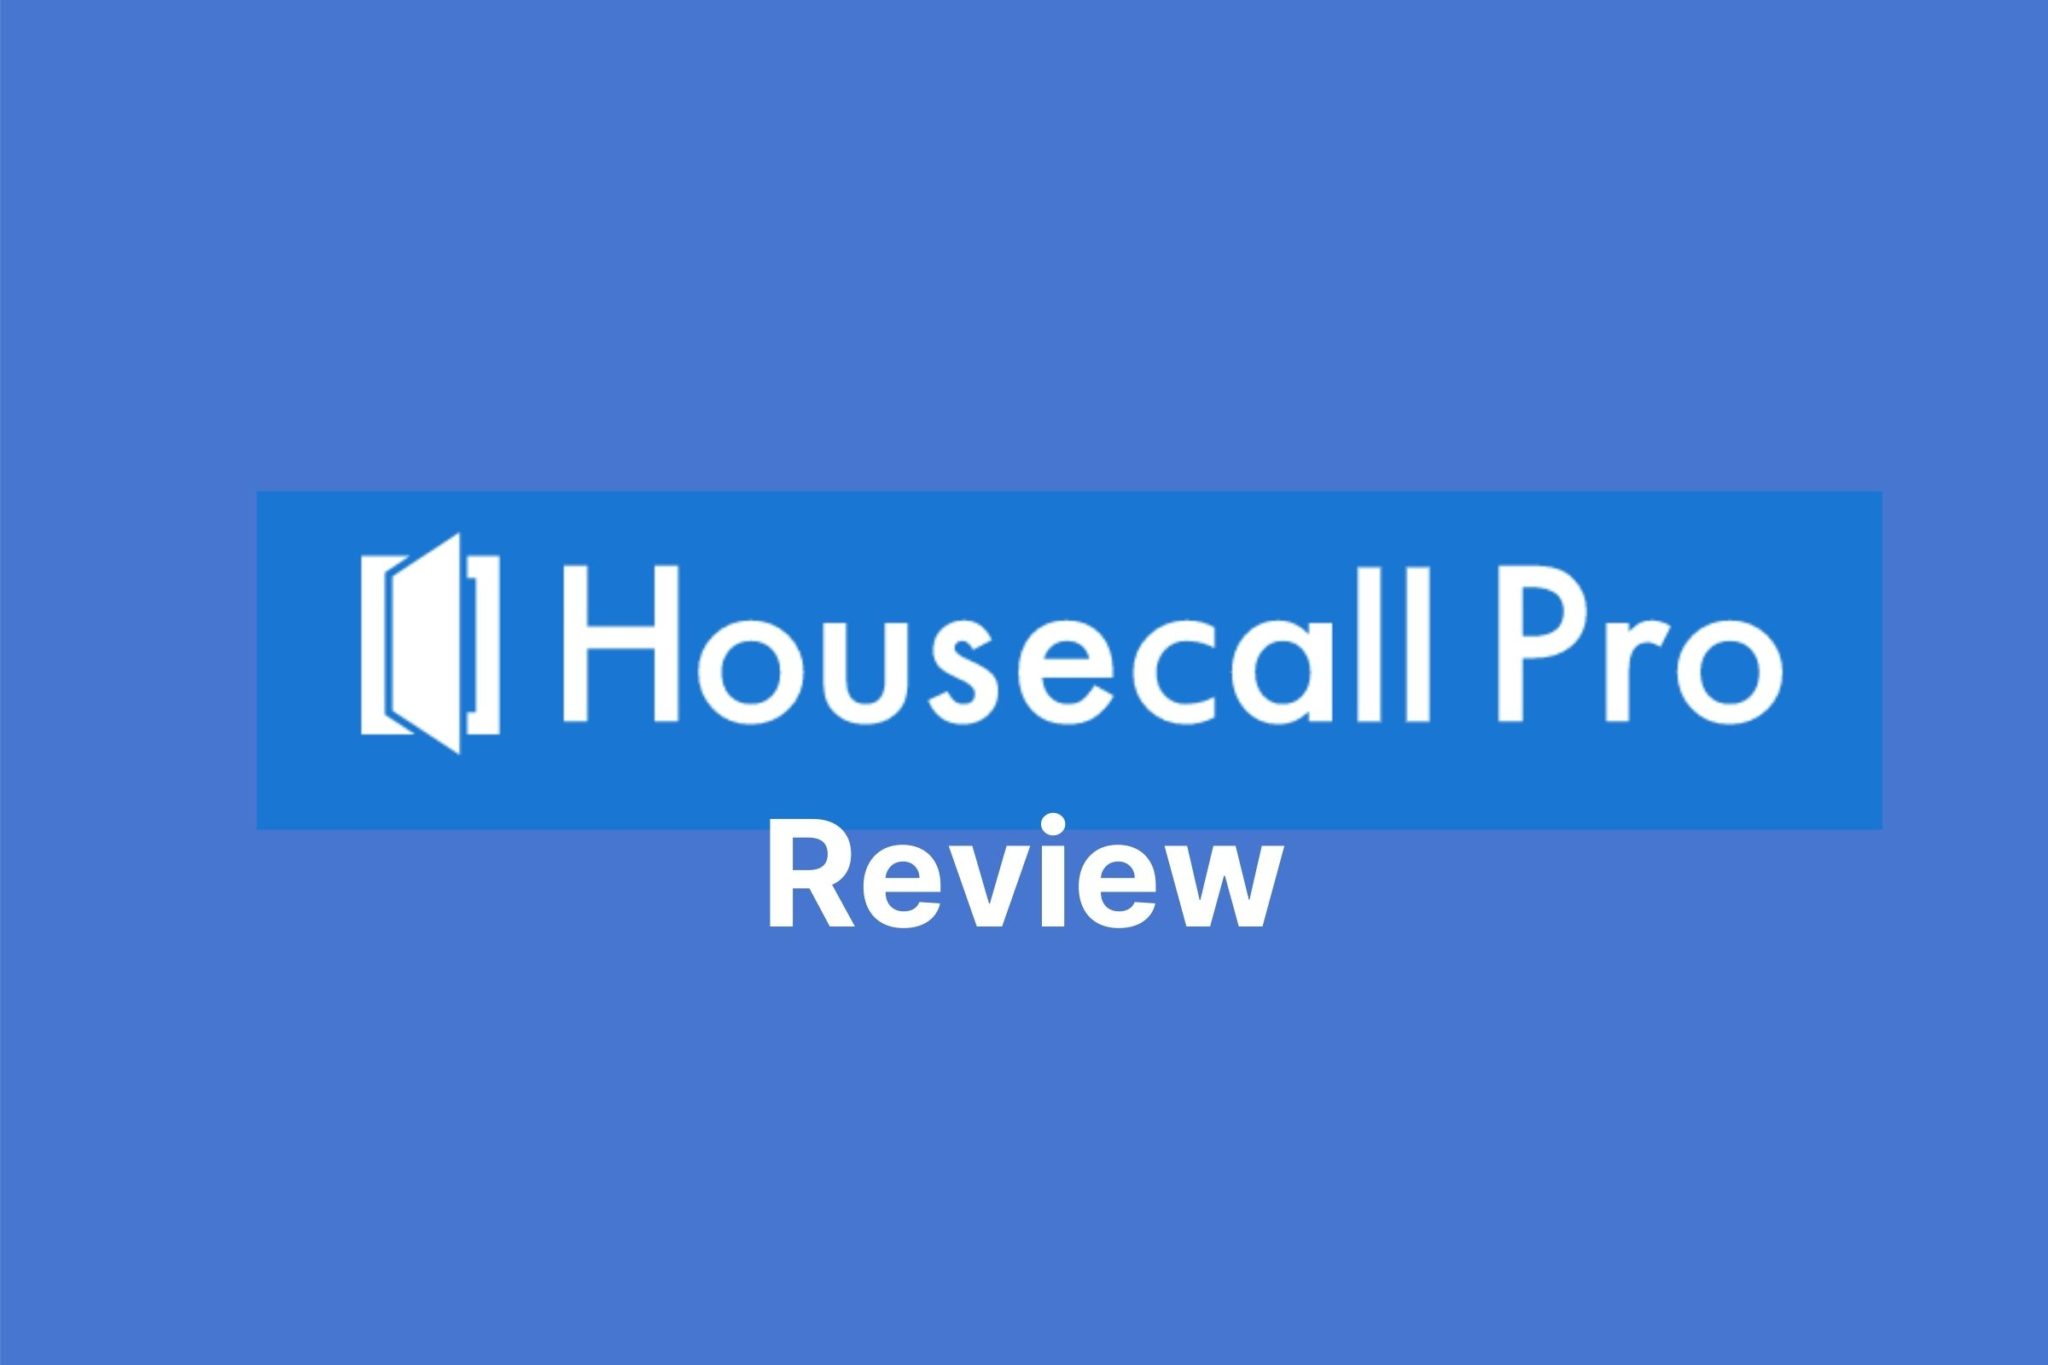 Review of Housecall Pro